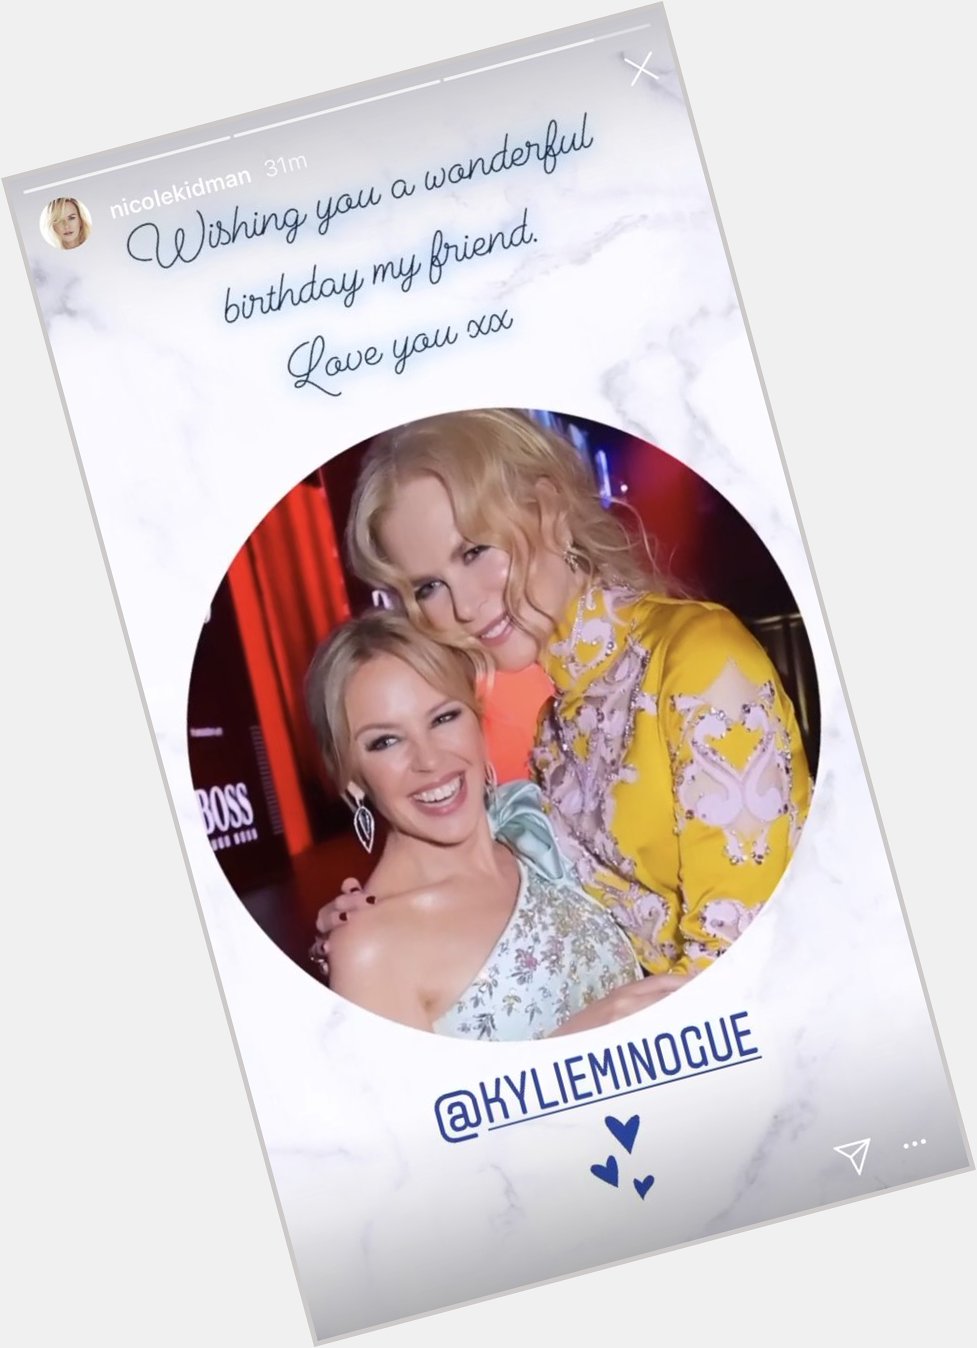 Nicole Kidman wished Kylie a Happy Birthday on social media. We love to see it!  